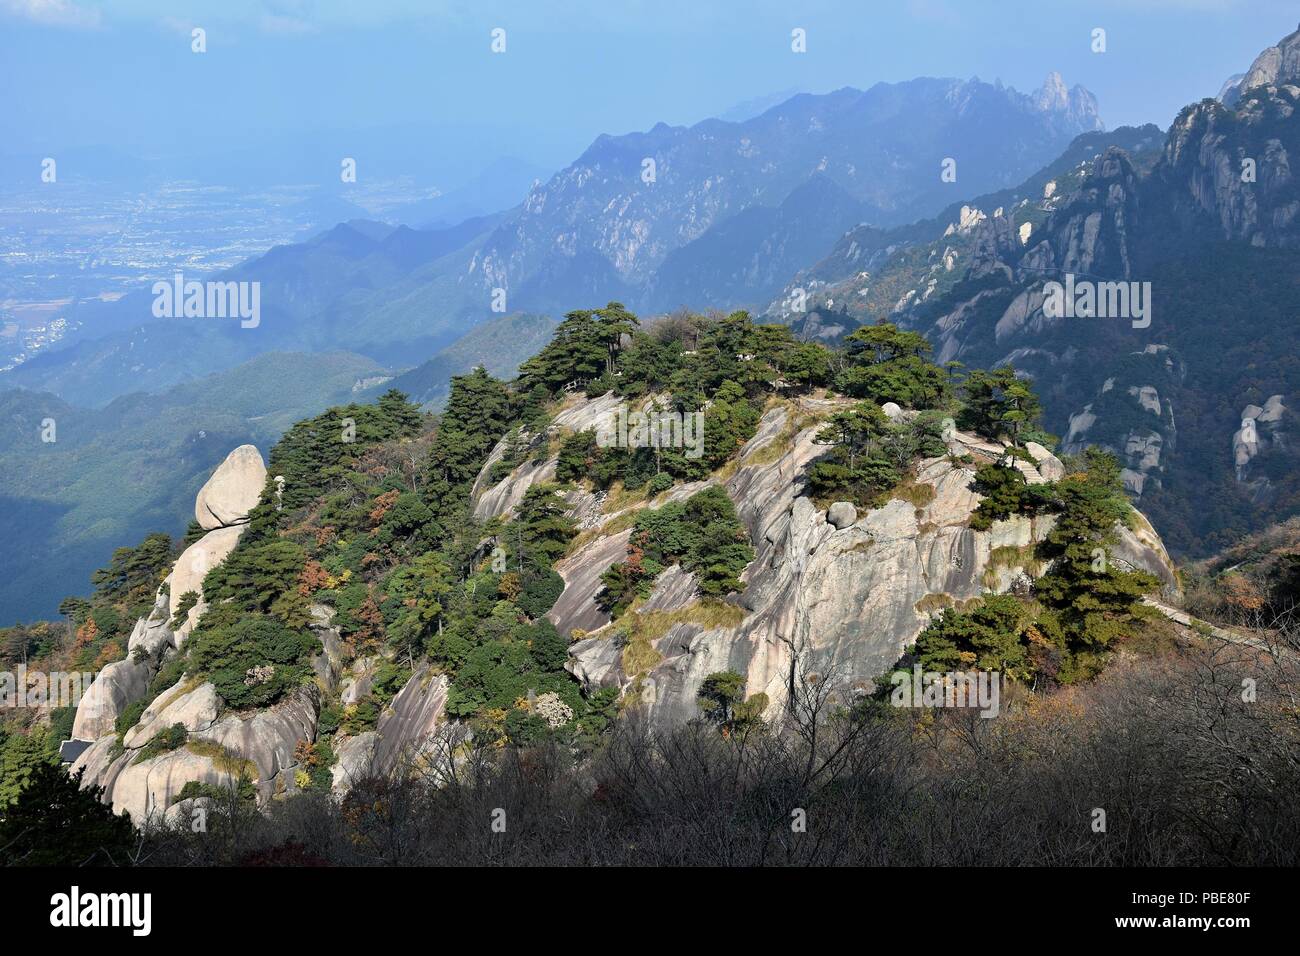 Mount Jiuhua, Nine Glorious Mountains, is one of the four sacred mountains of Chinese Buddhism located in Qingyang County in Anhui province in China. Stock Photo